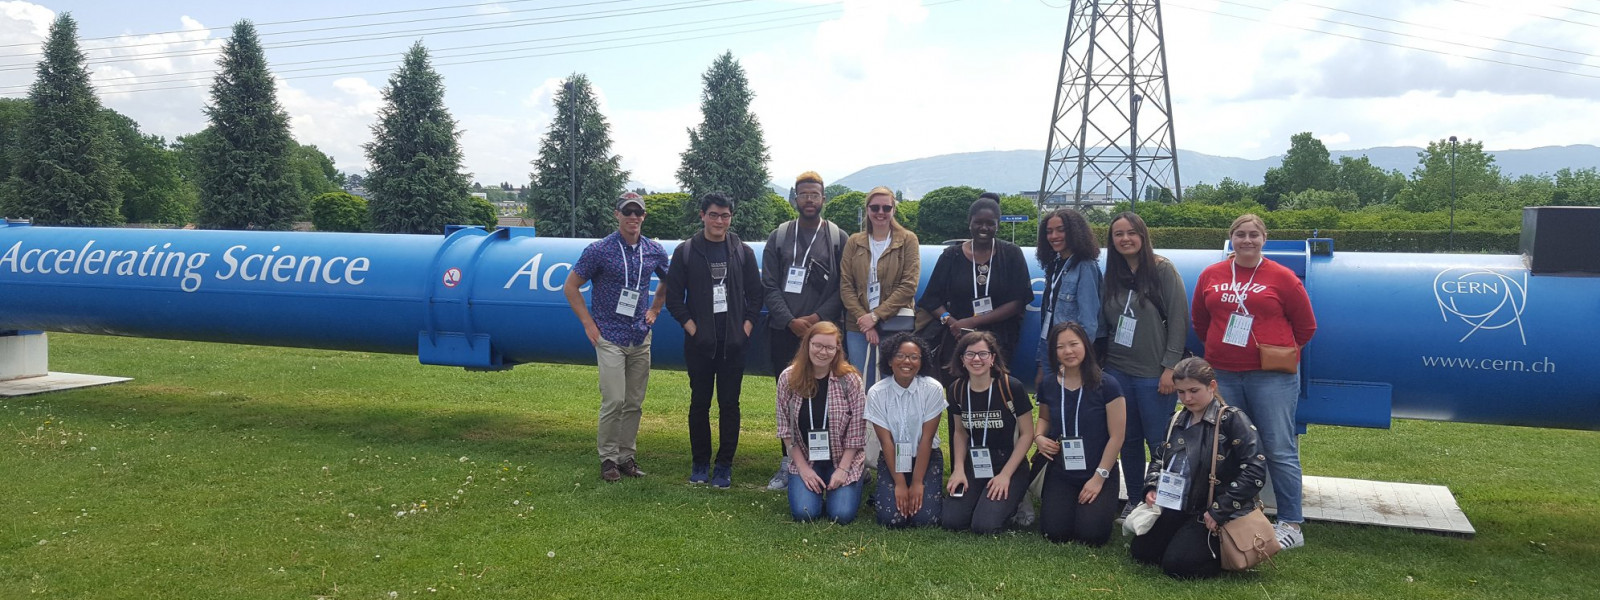 The group tours CERN.